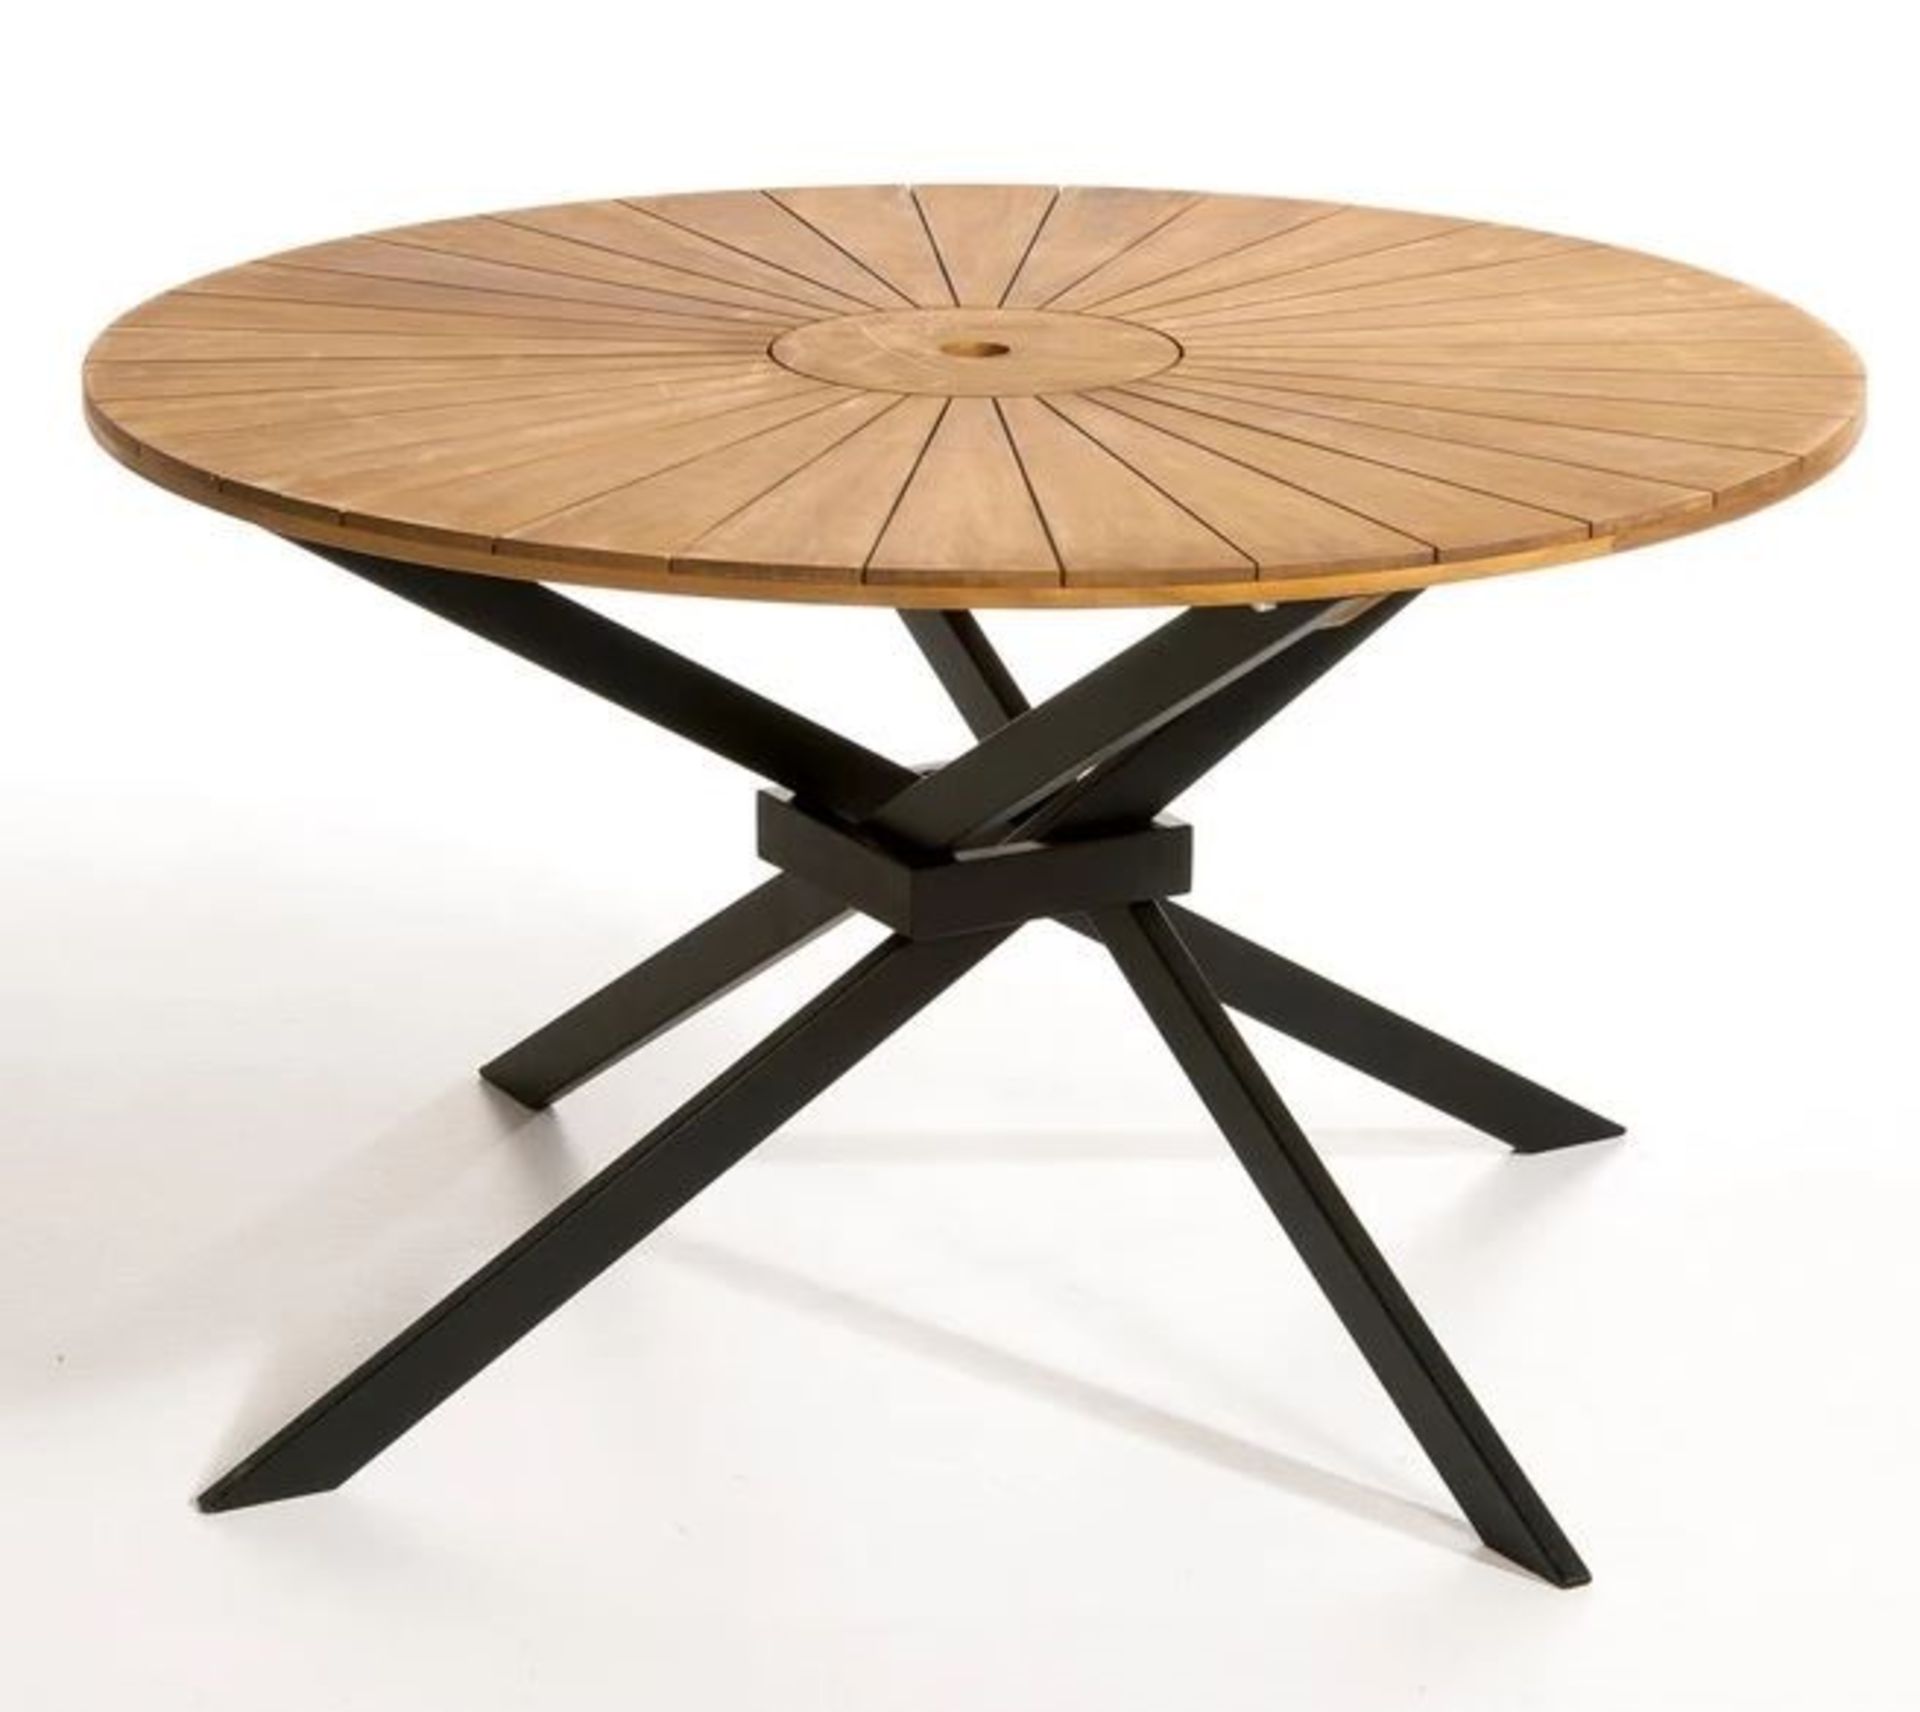 1 GRADE B BOXED JAKTA ROUND GARDEN TABLE IN NATURAL AND BLACK / RRP £350.00 (PUBLIC VIEWING